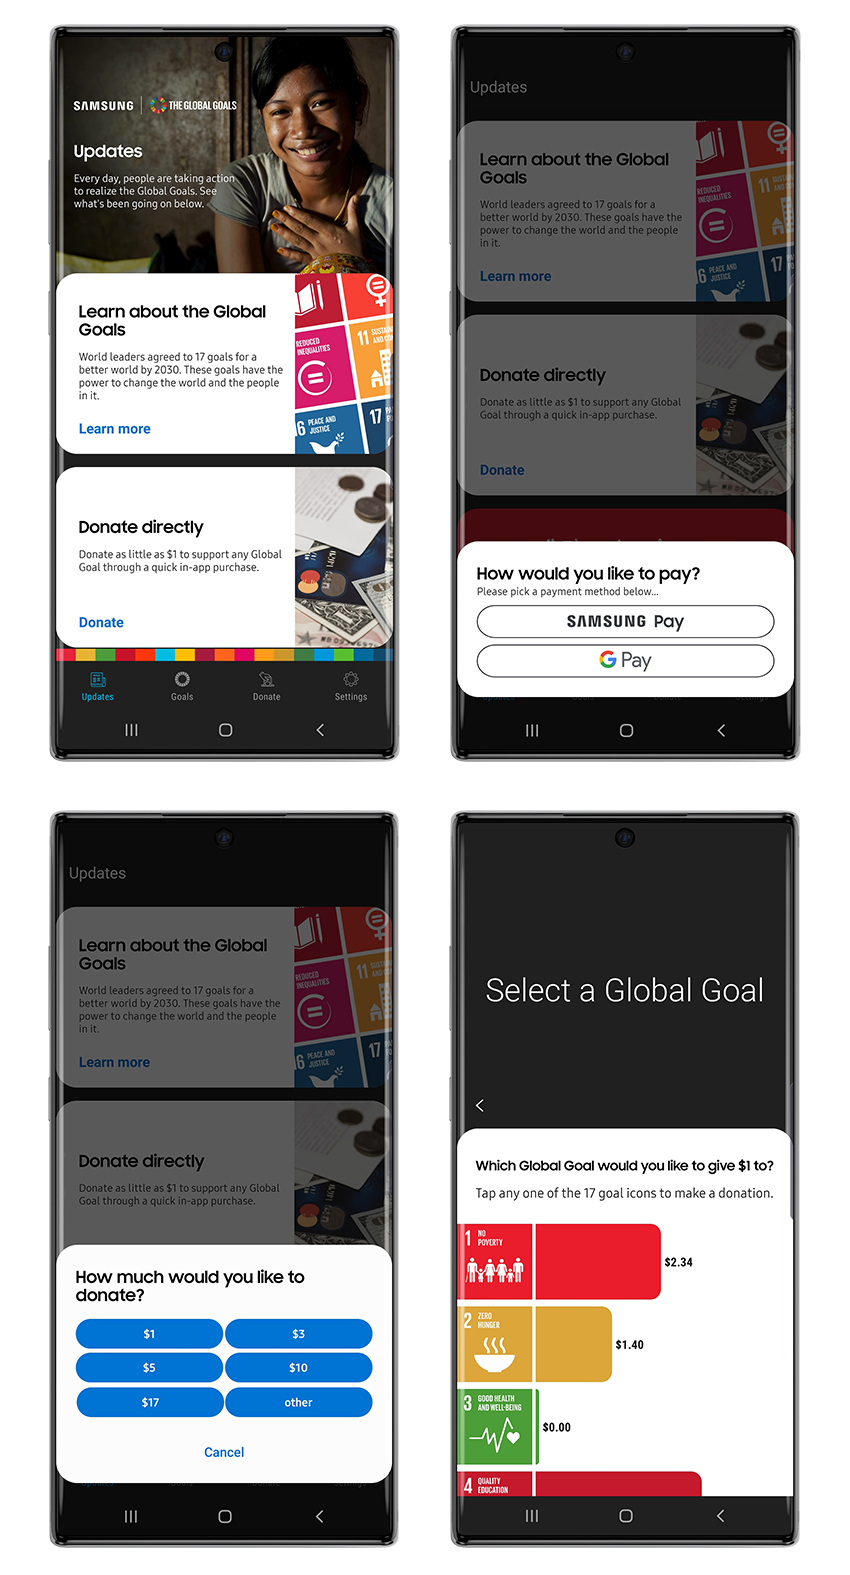 Samsung Global Goals App new update_Donate directly